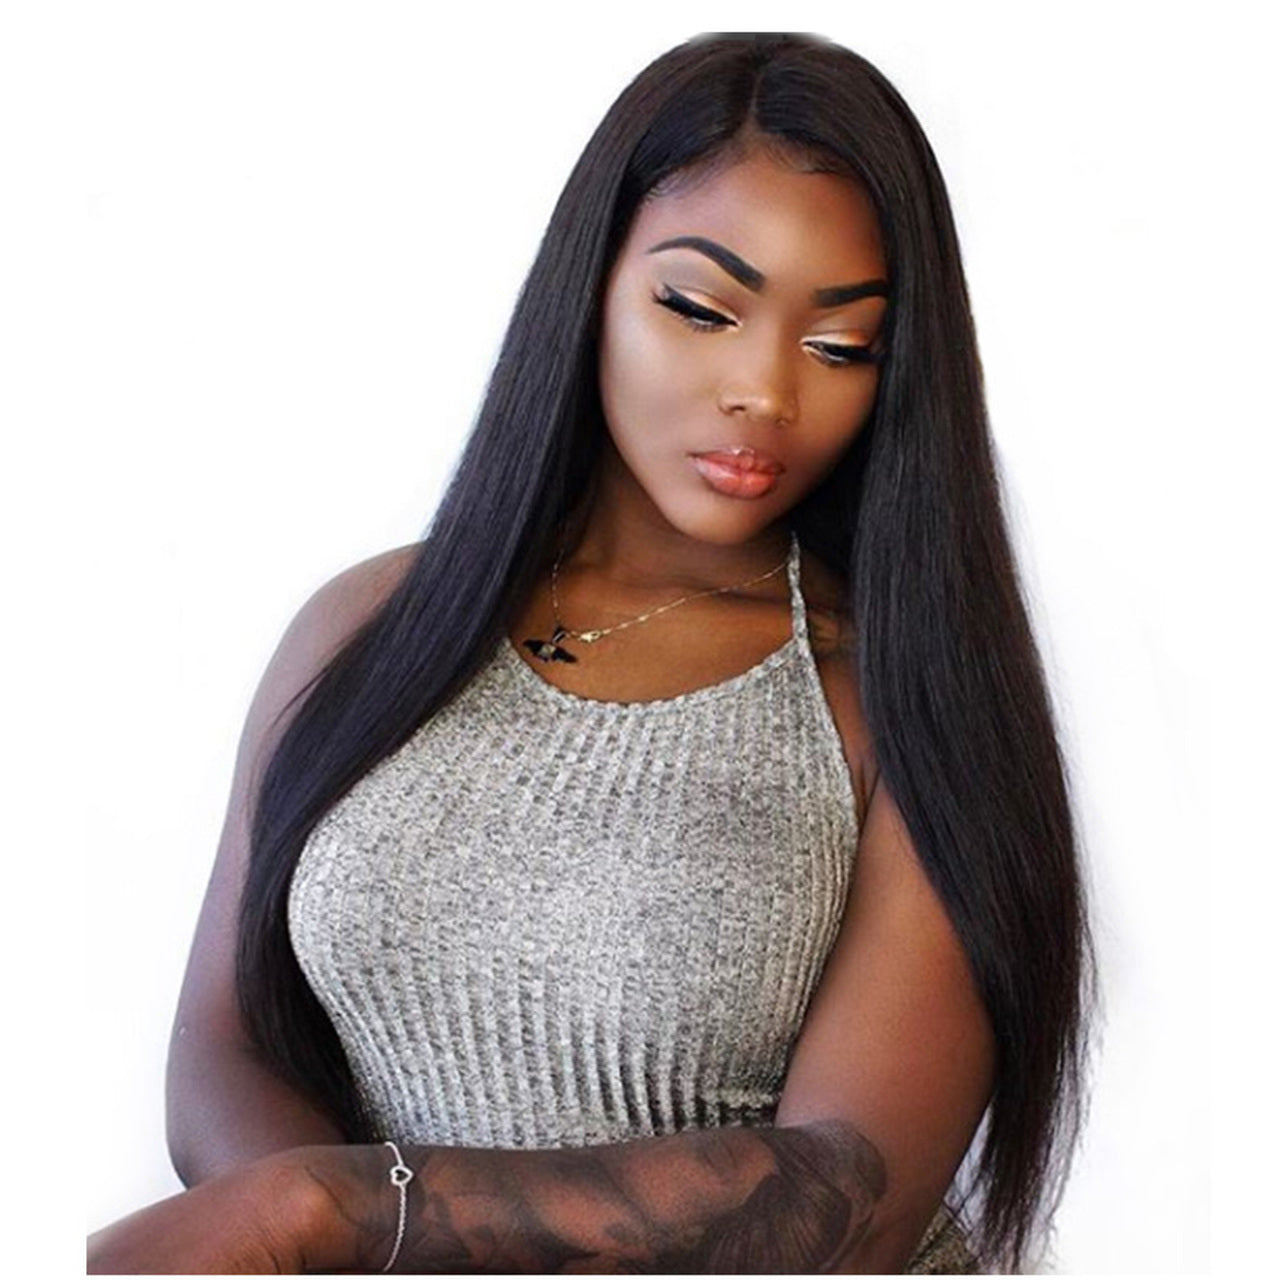 IE Hair Straight Hair Bundles With Frontal Virgin Human Hair Bundles With Frontal Brazilian Hair Weave Bundles With Frontal 